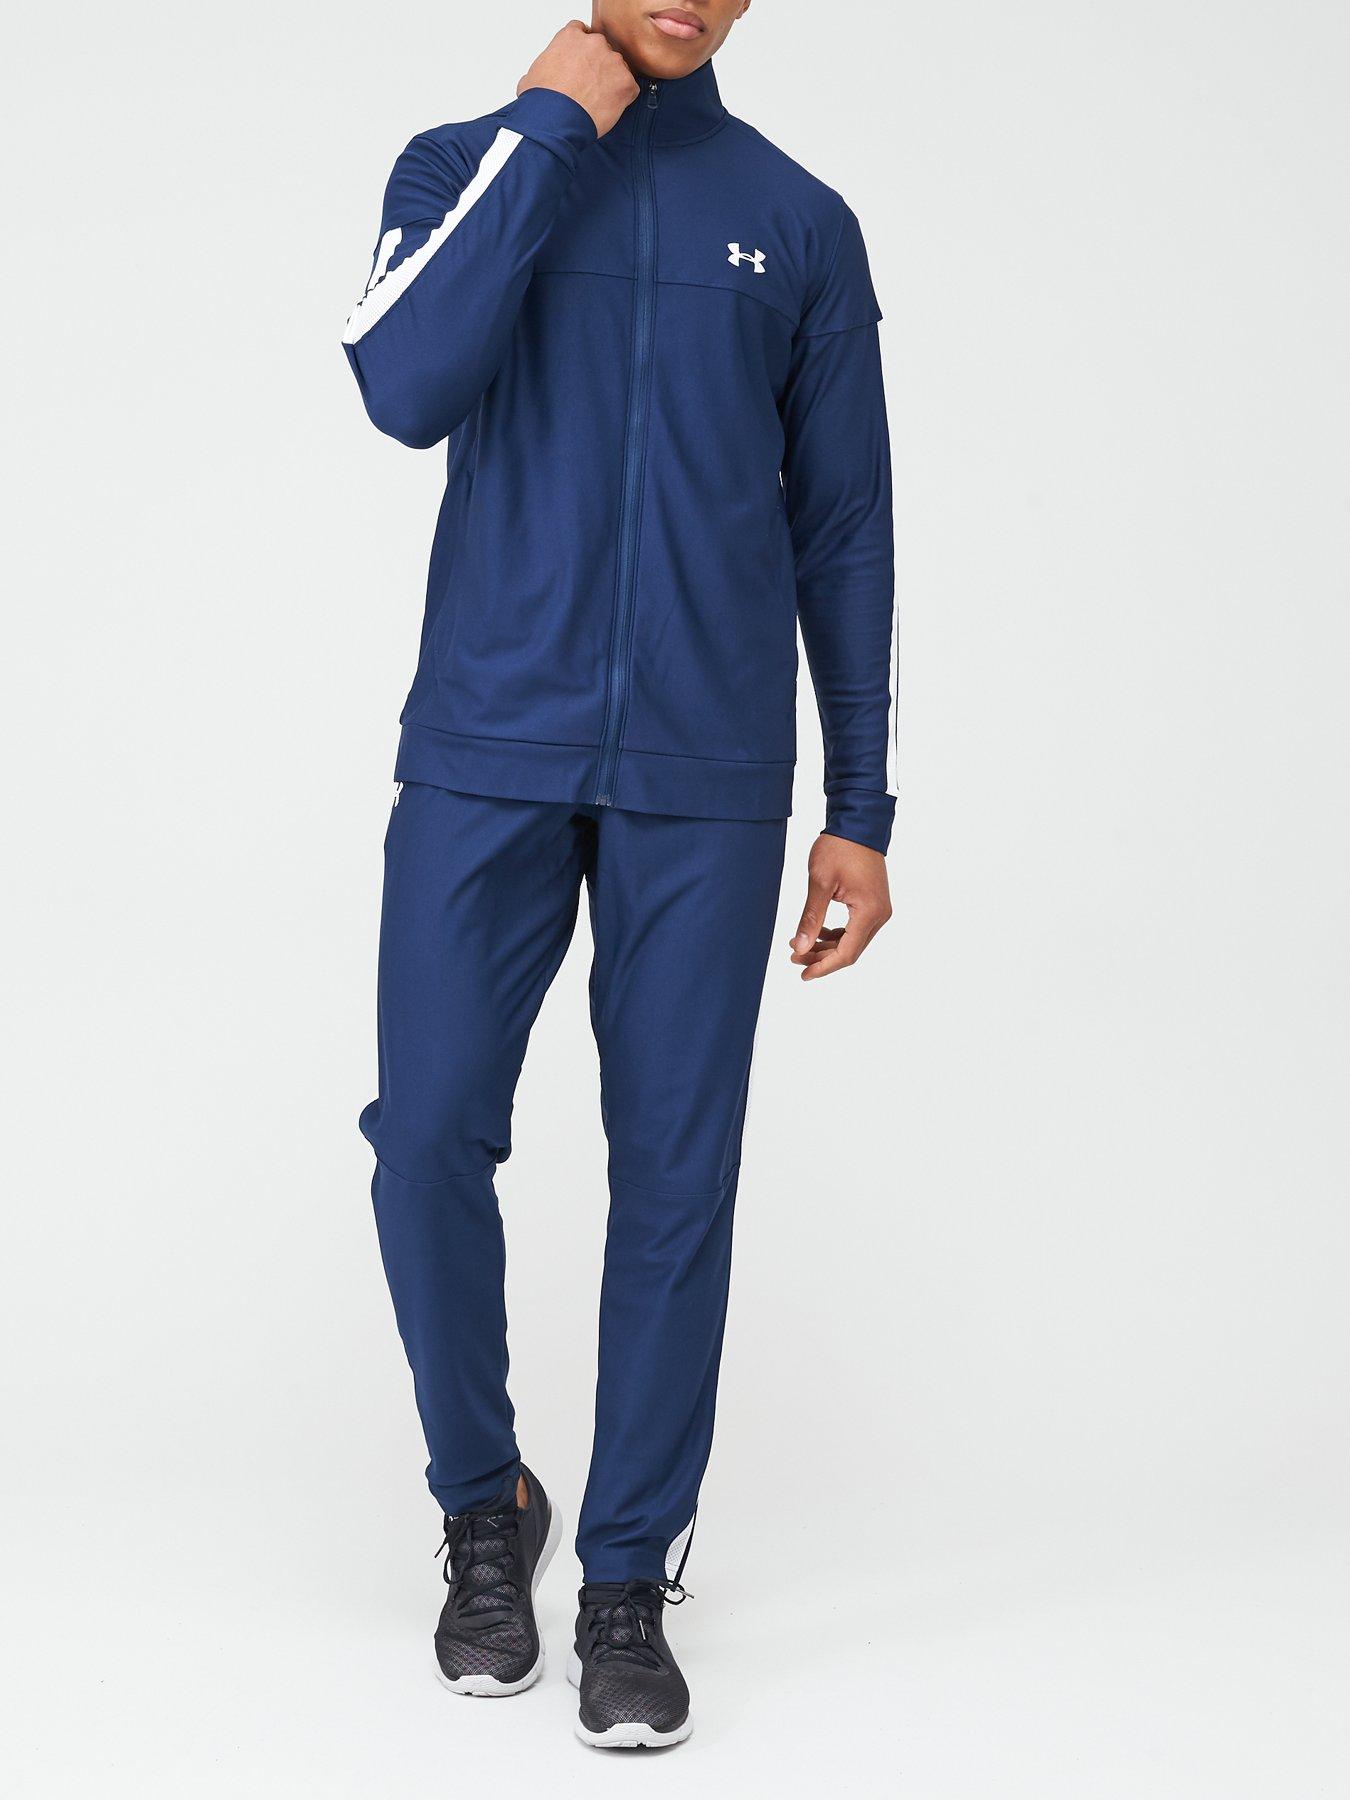 Under armour | Tracksuits | Mens sports 